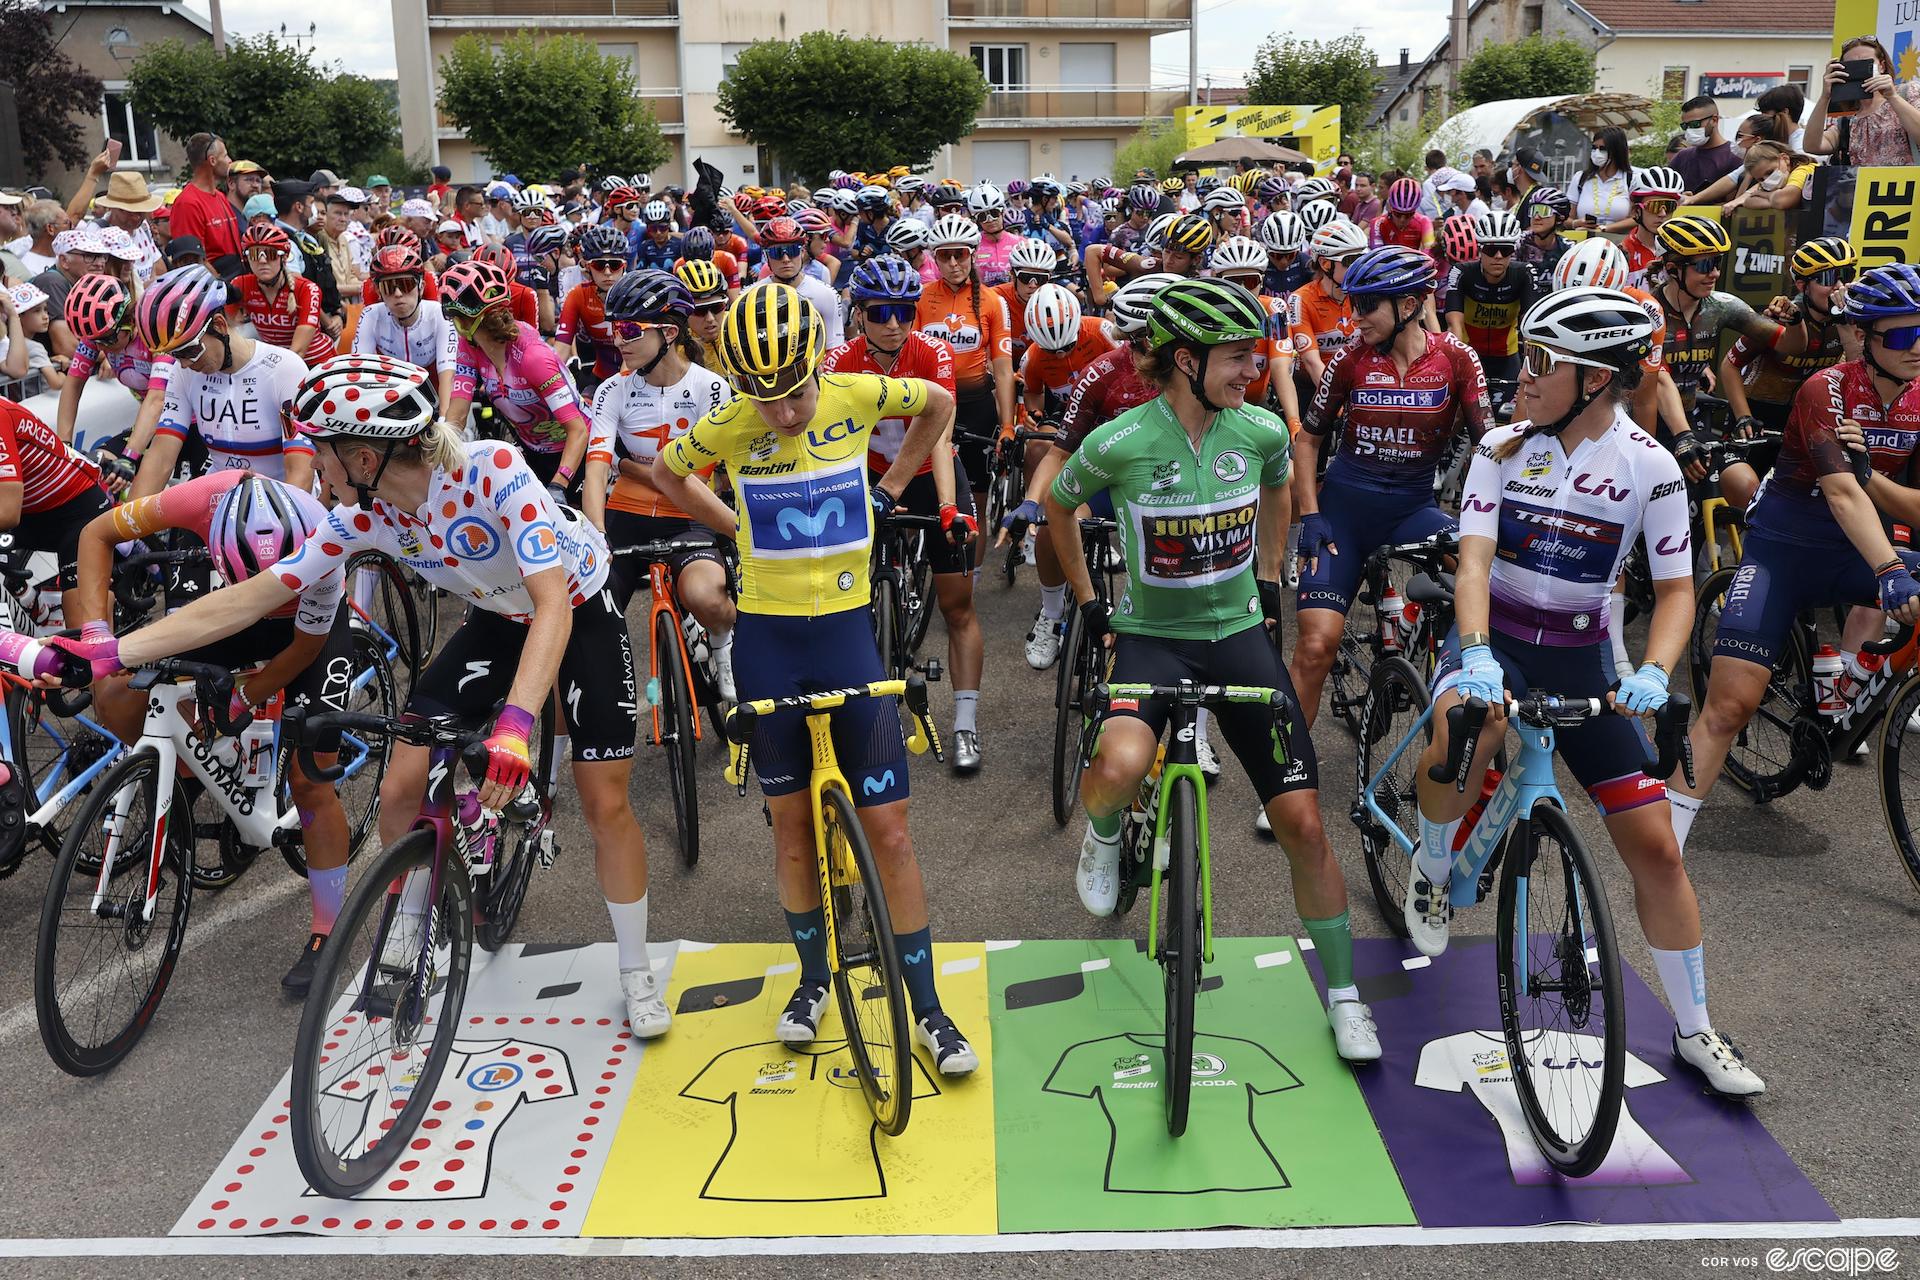 Preview Your stagebystage guide to the 2023 Tour de France Femmes